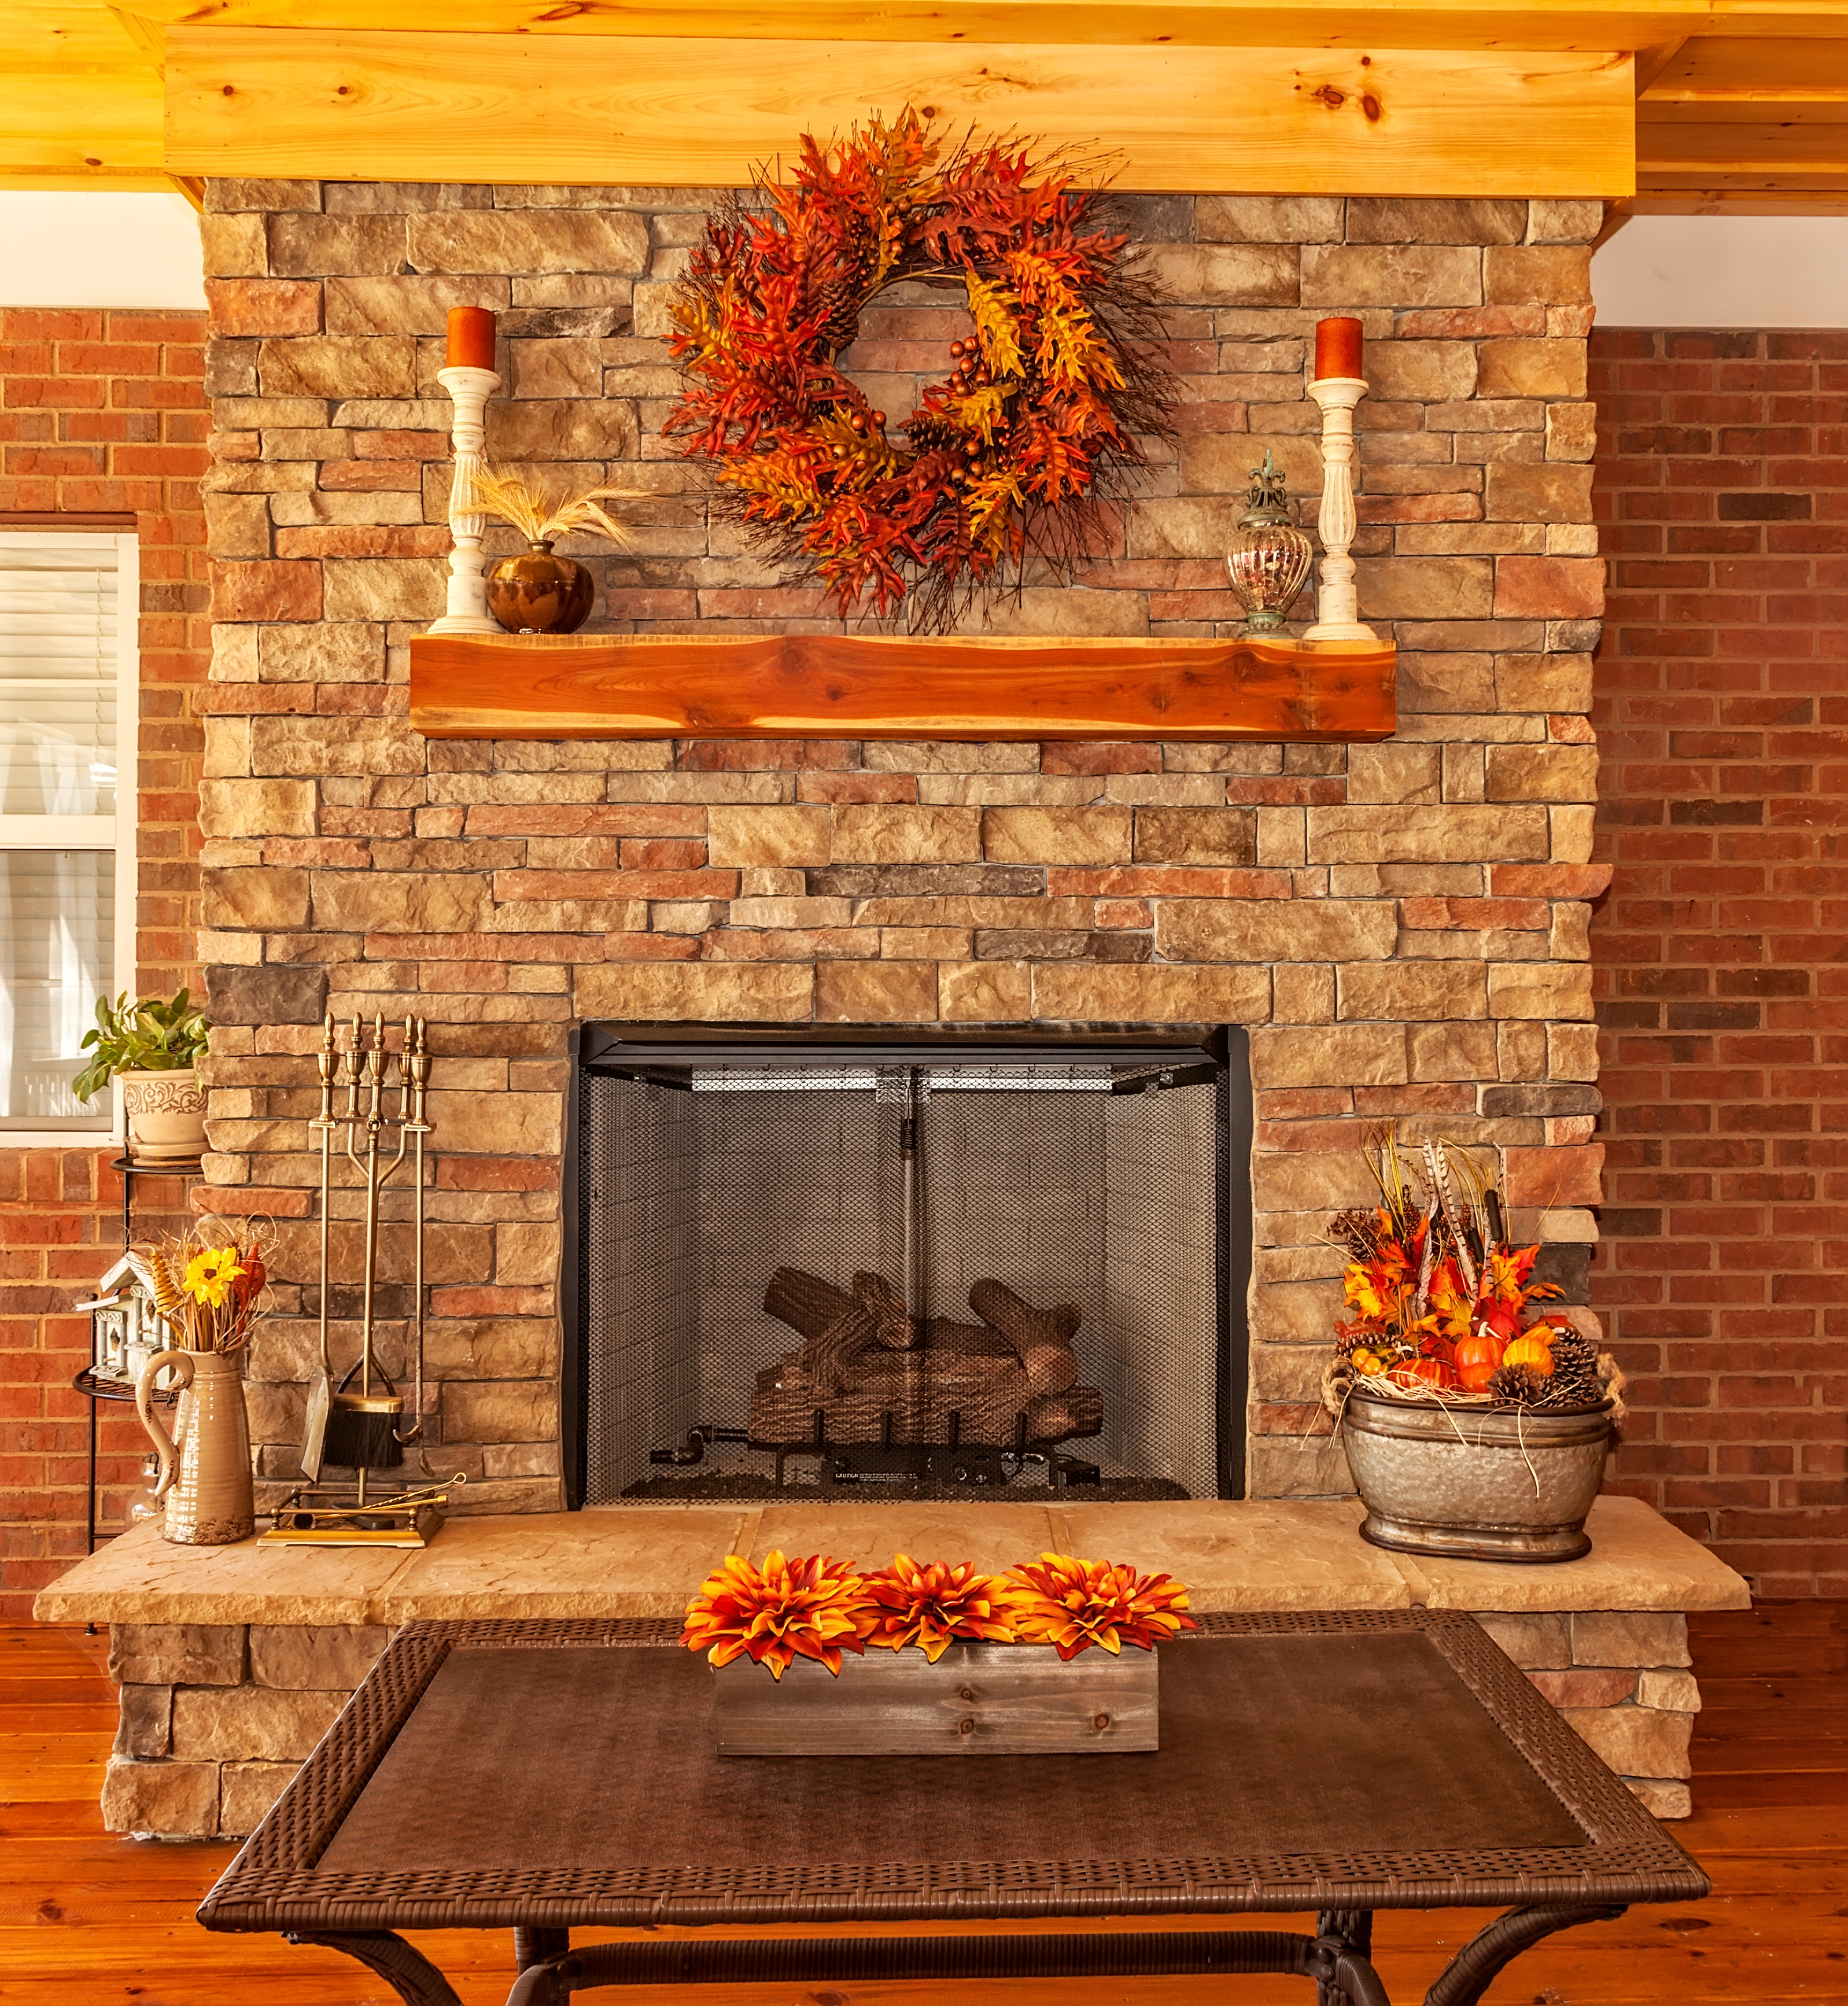 5 Fall Mantel Decorating Ideas That'll Make You Look Like a Pro 44